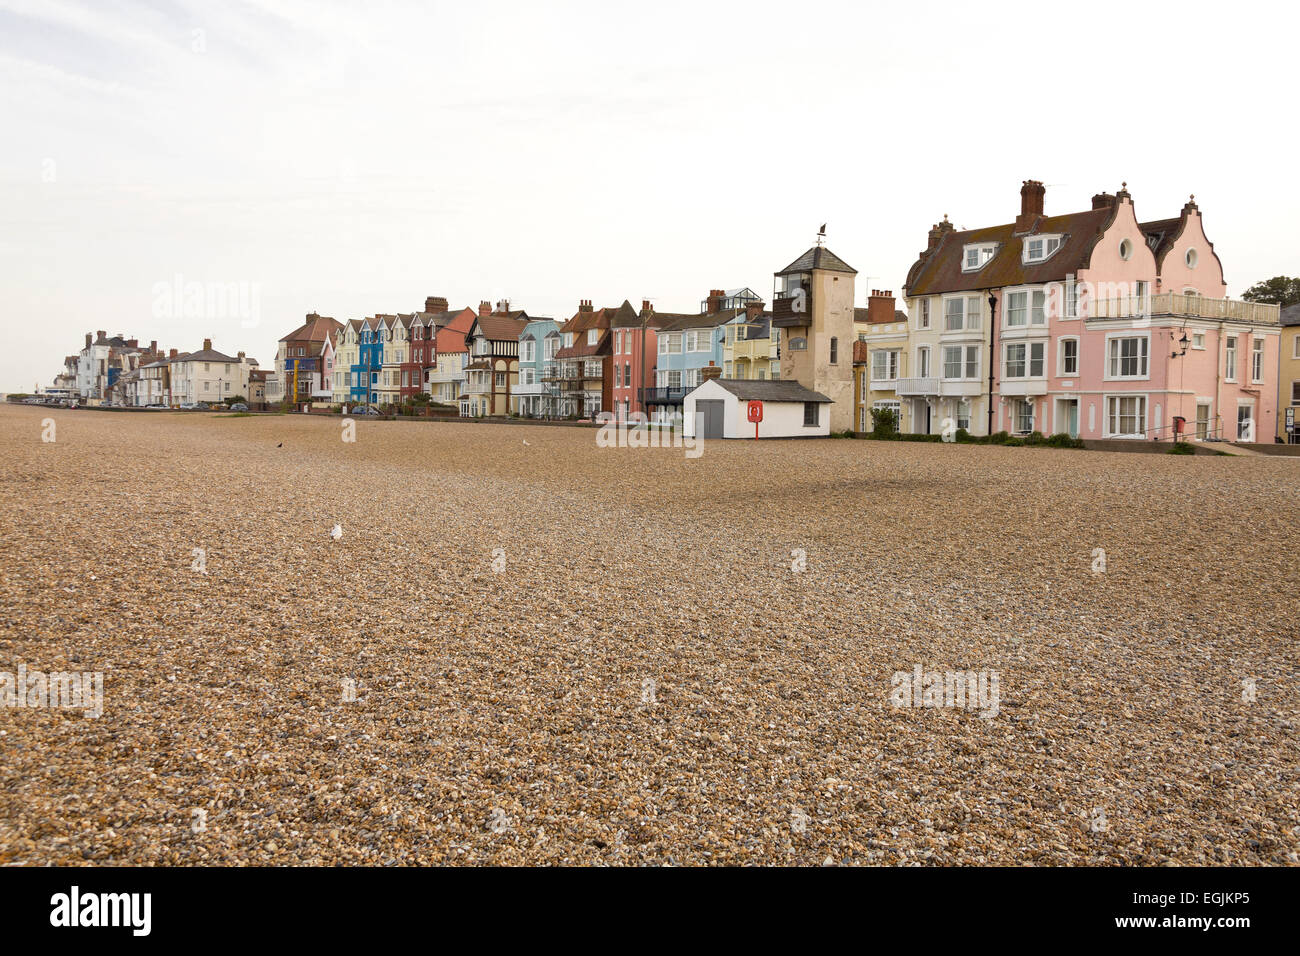 Seafront at Aldeburgh Suffolk from the shingle beach with houses and fishermens lookout tower Stock Photo